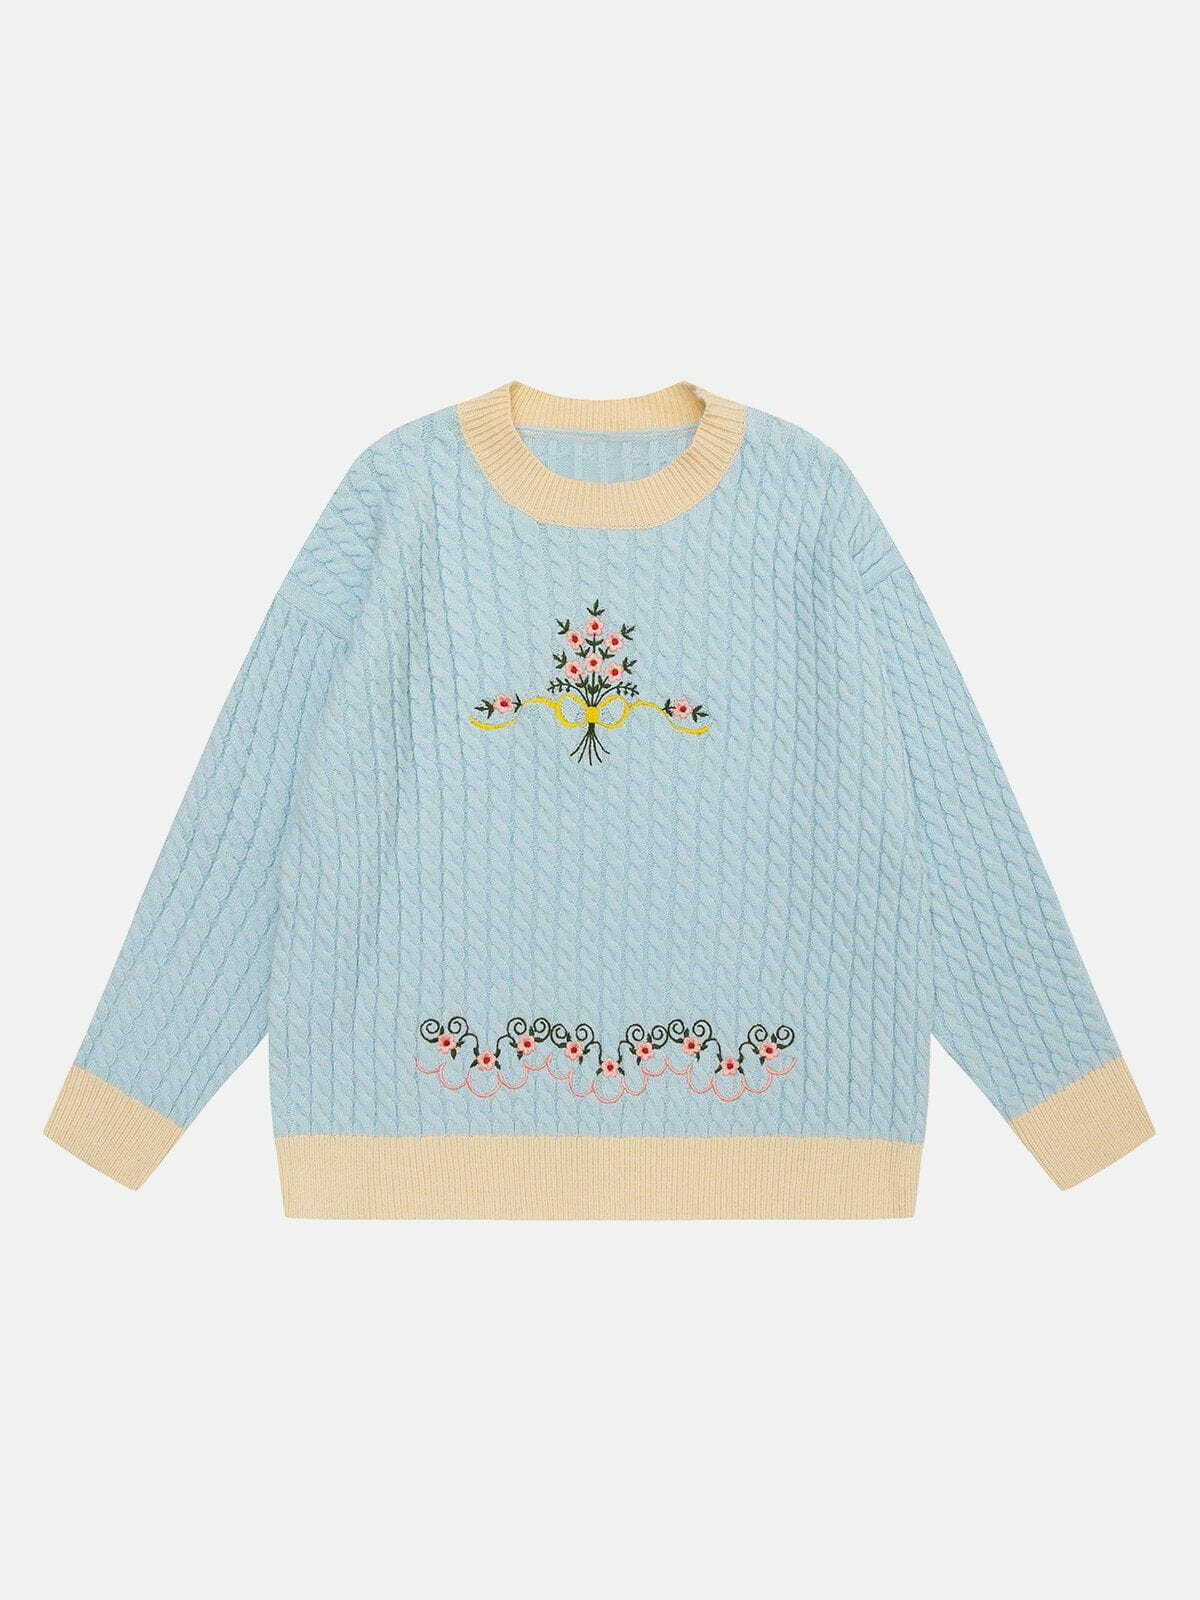 floral bouquet embroidery sweater quirky y2k fashion staple 4694